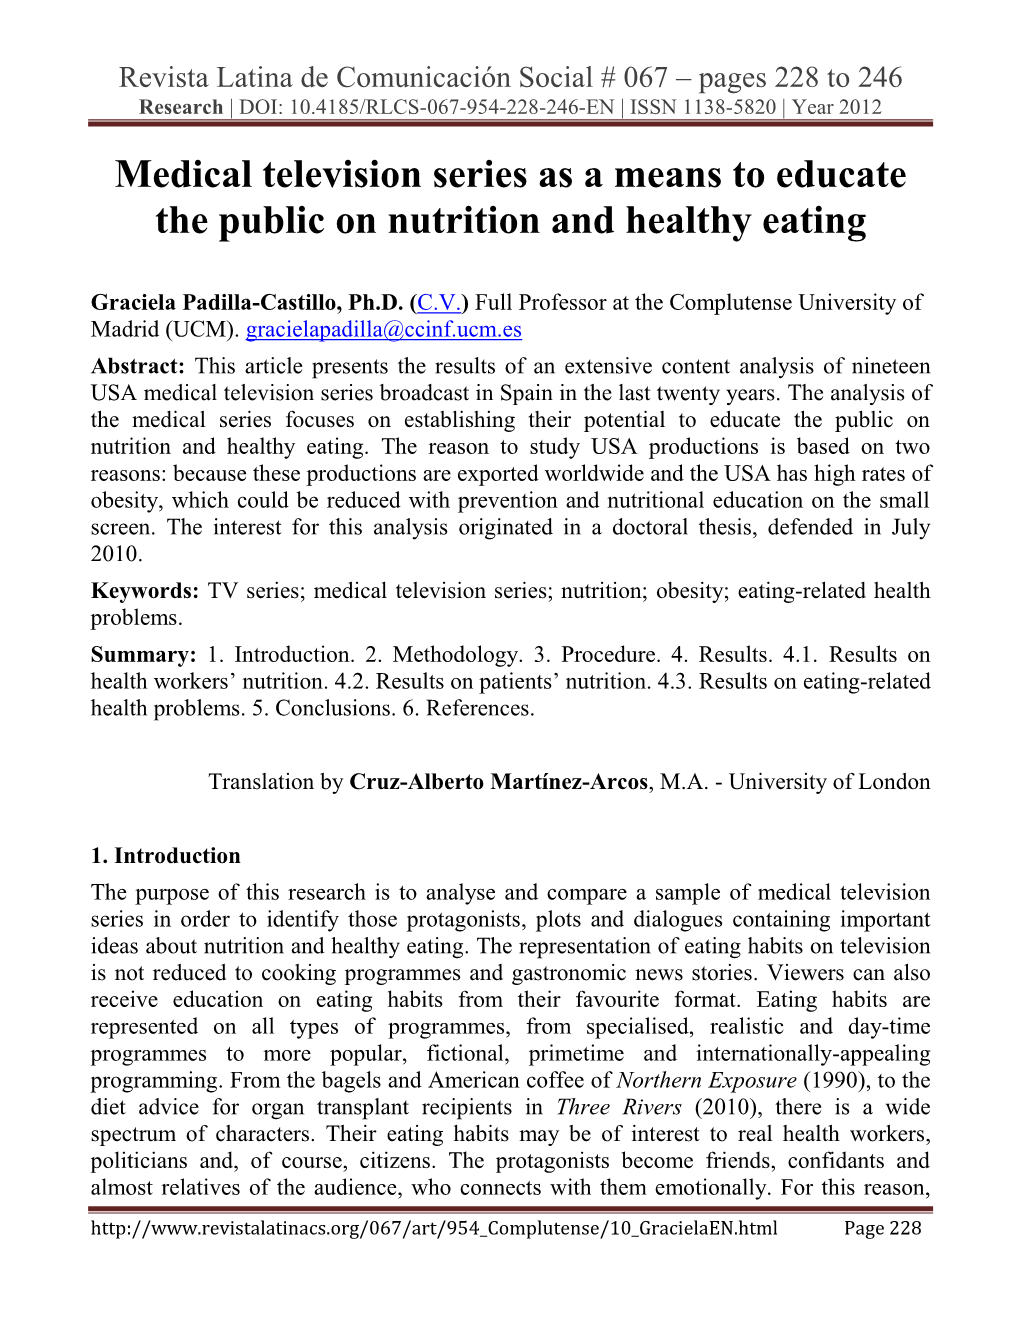 Medical Television Series As a Means to Educate the Public on Nutrition and Healthy Eating